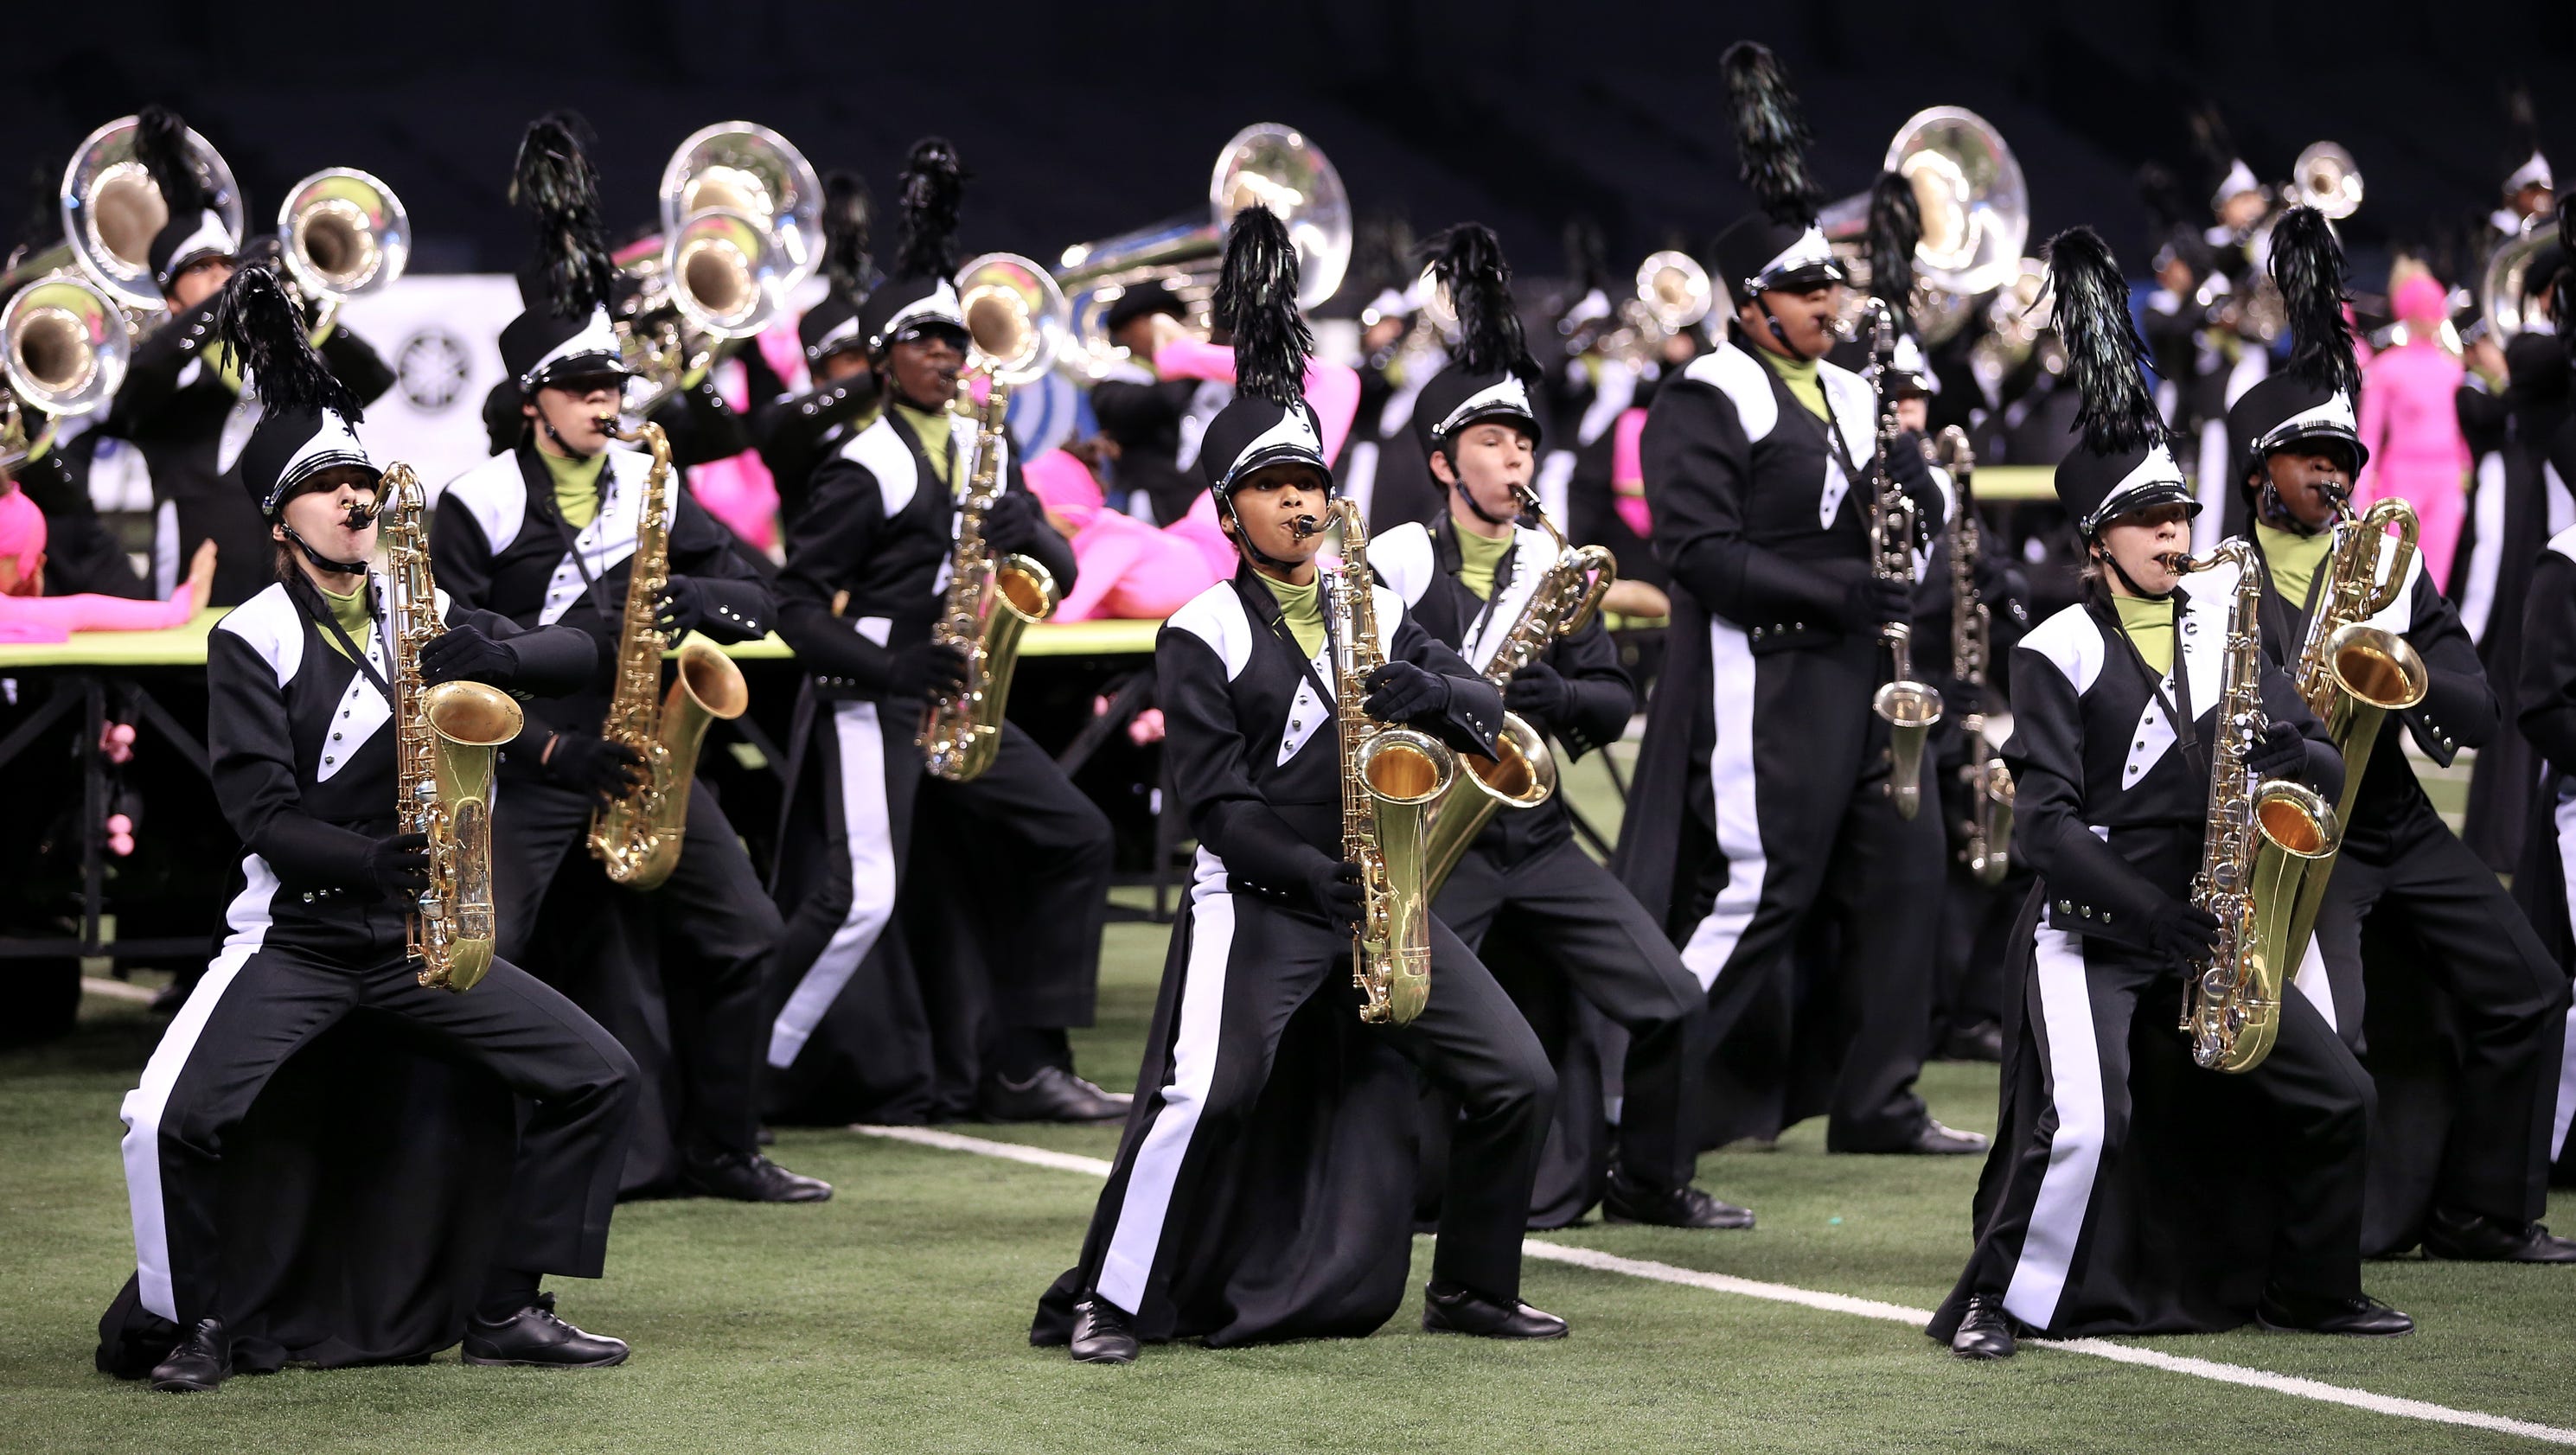 Is your favorite band shining at the Bands of America Super Regional?